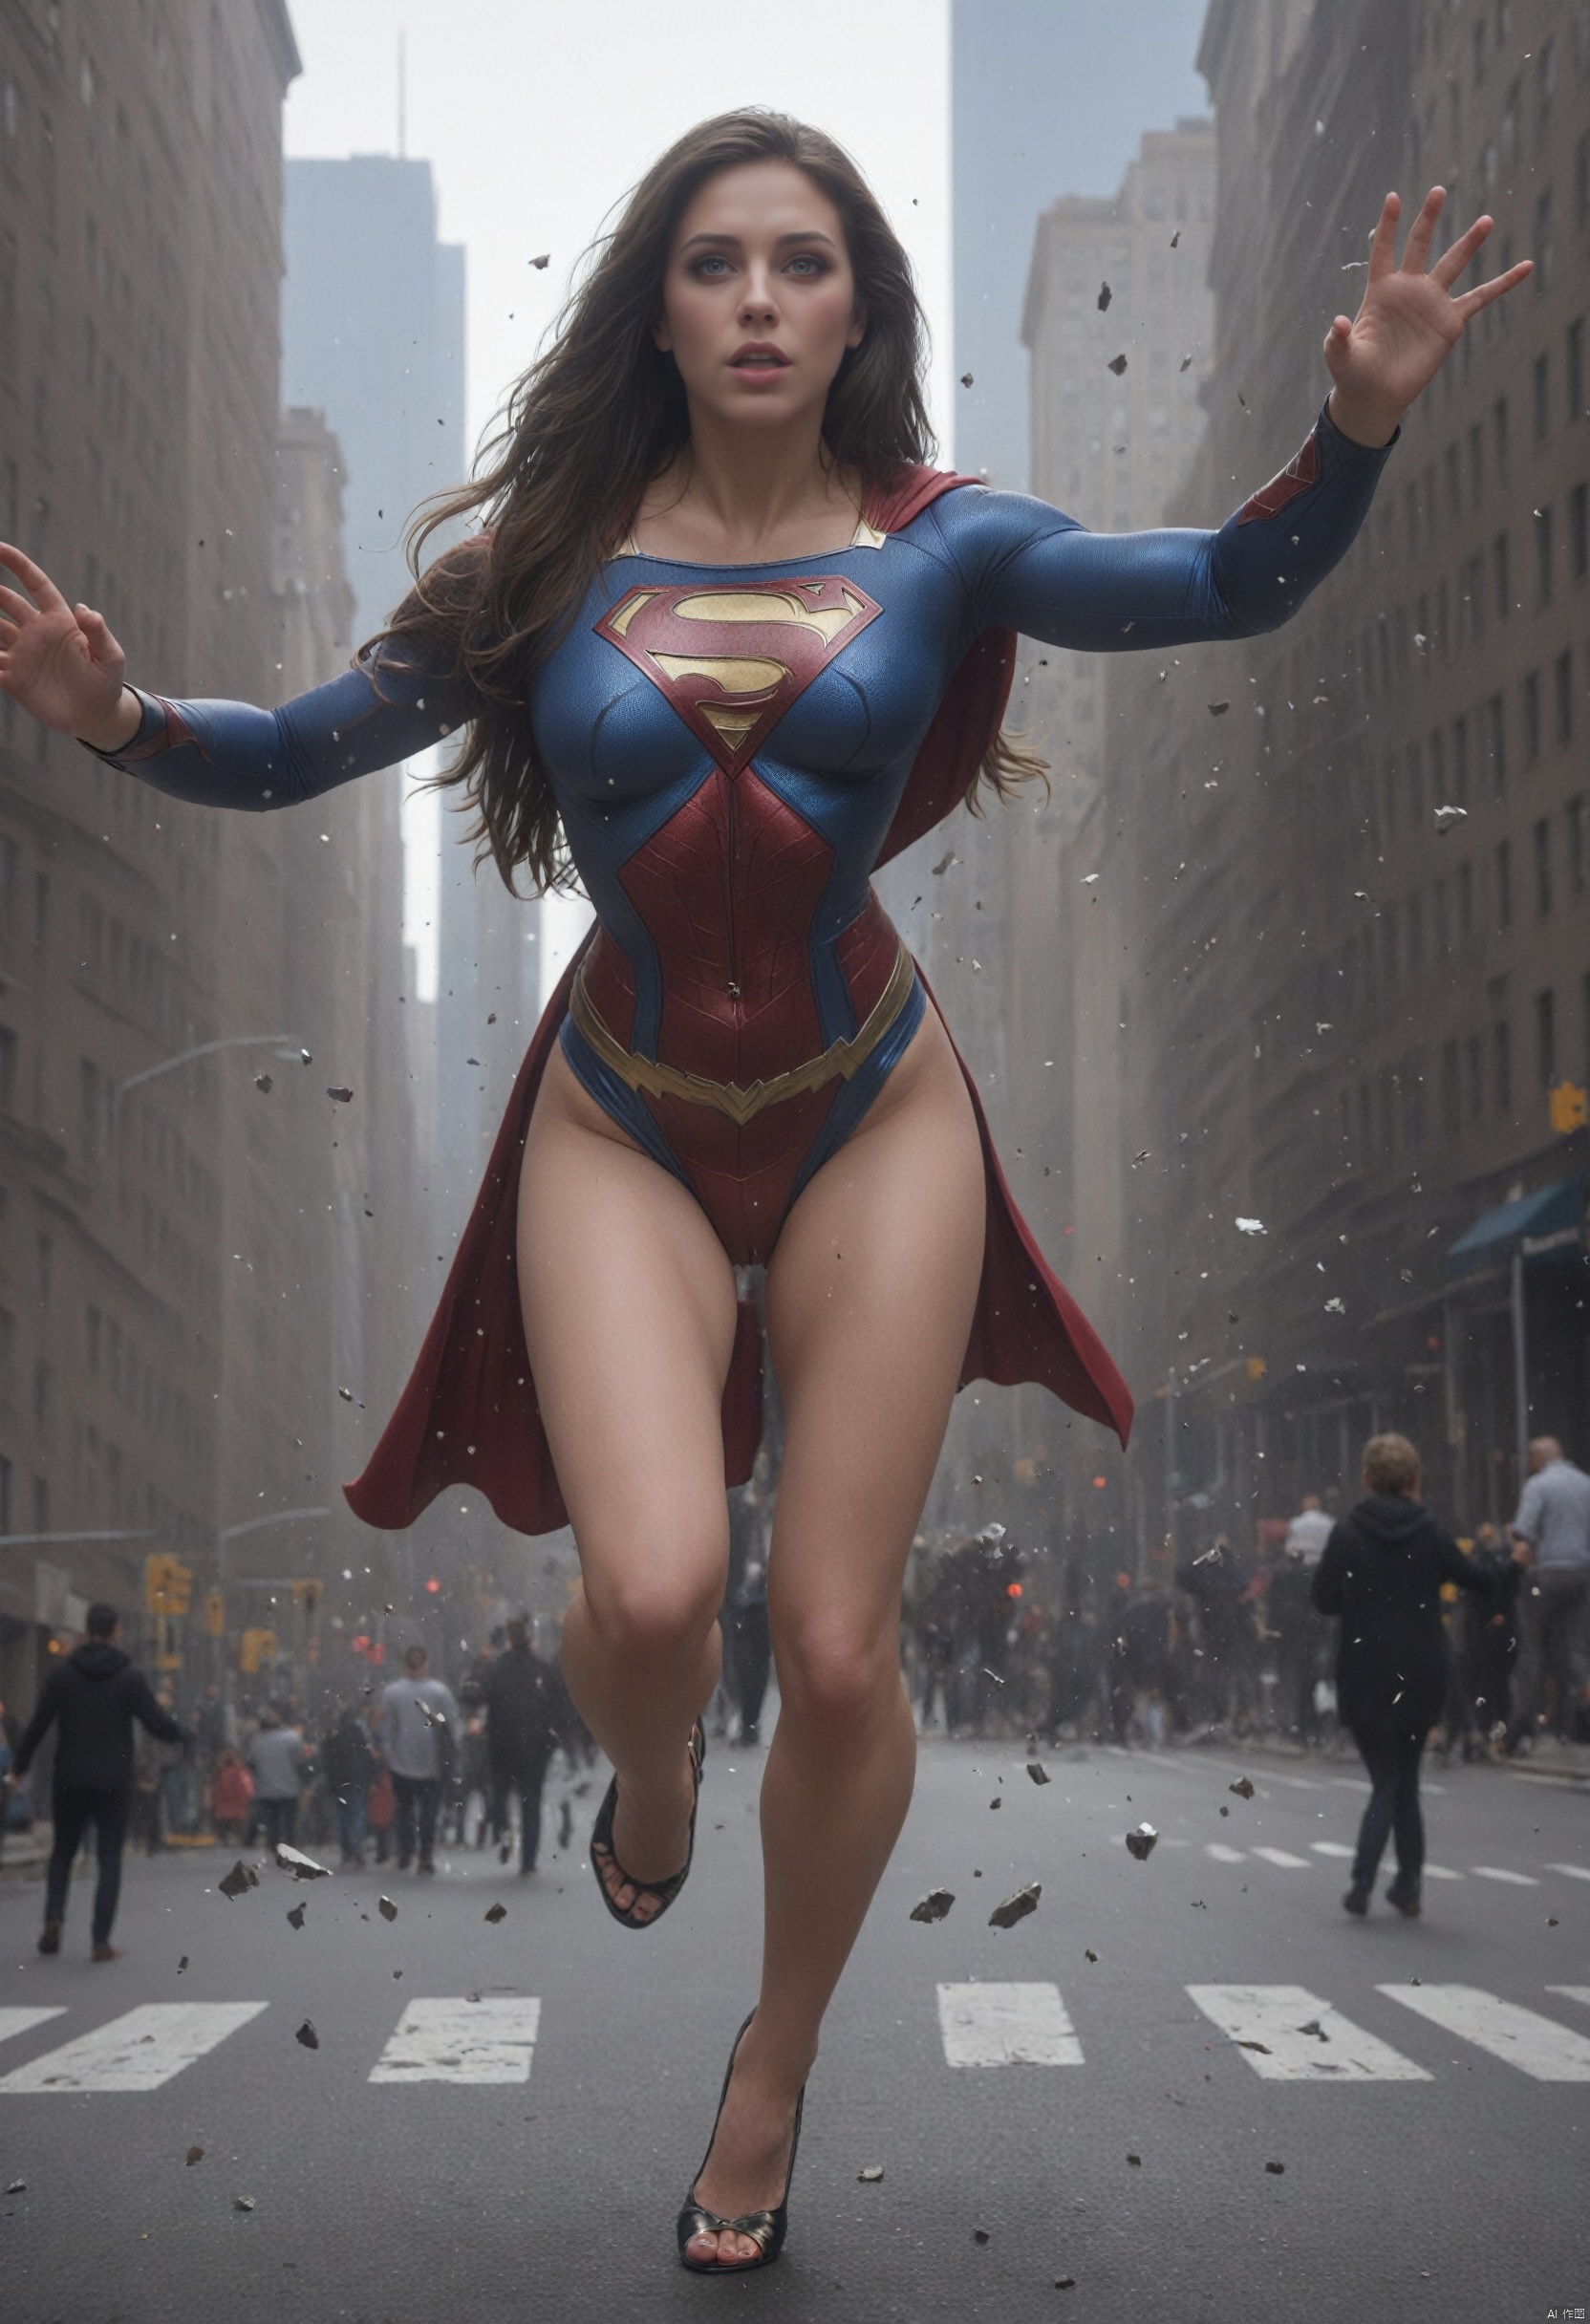  Hyperrealistic photoshoot, a(super woman-flying-high, main-focus), a(busy-New-York-city-street, below, out-of-focus),((monster-falling-down, in-focus)), masterpiece,super detail, Giantess, KALEIDOSHATTER